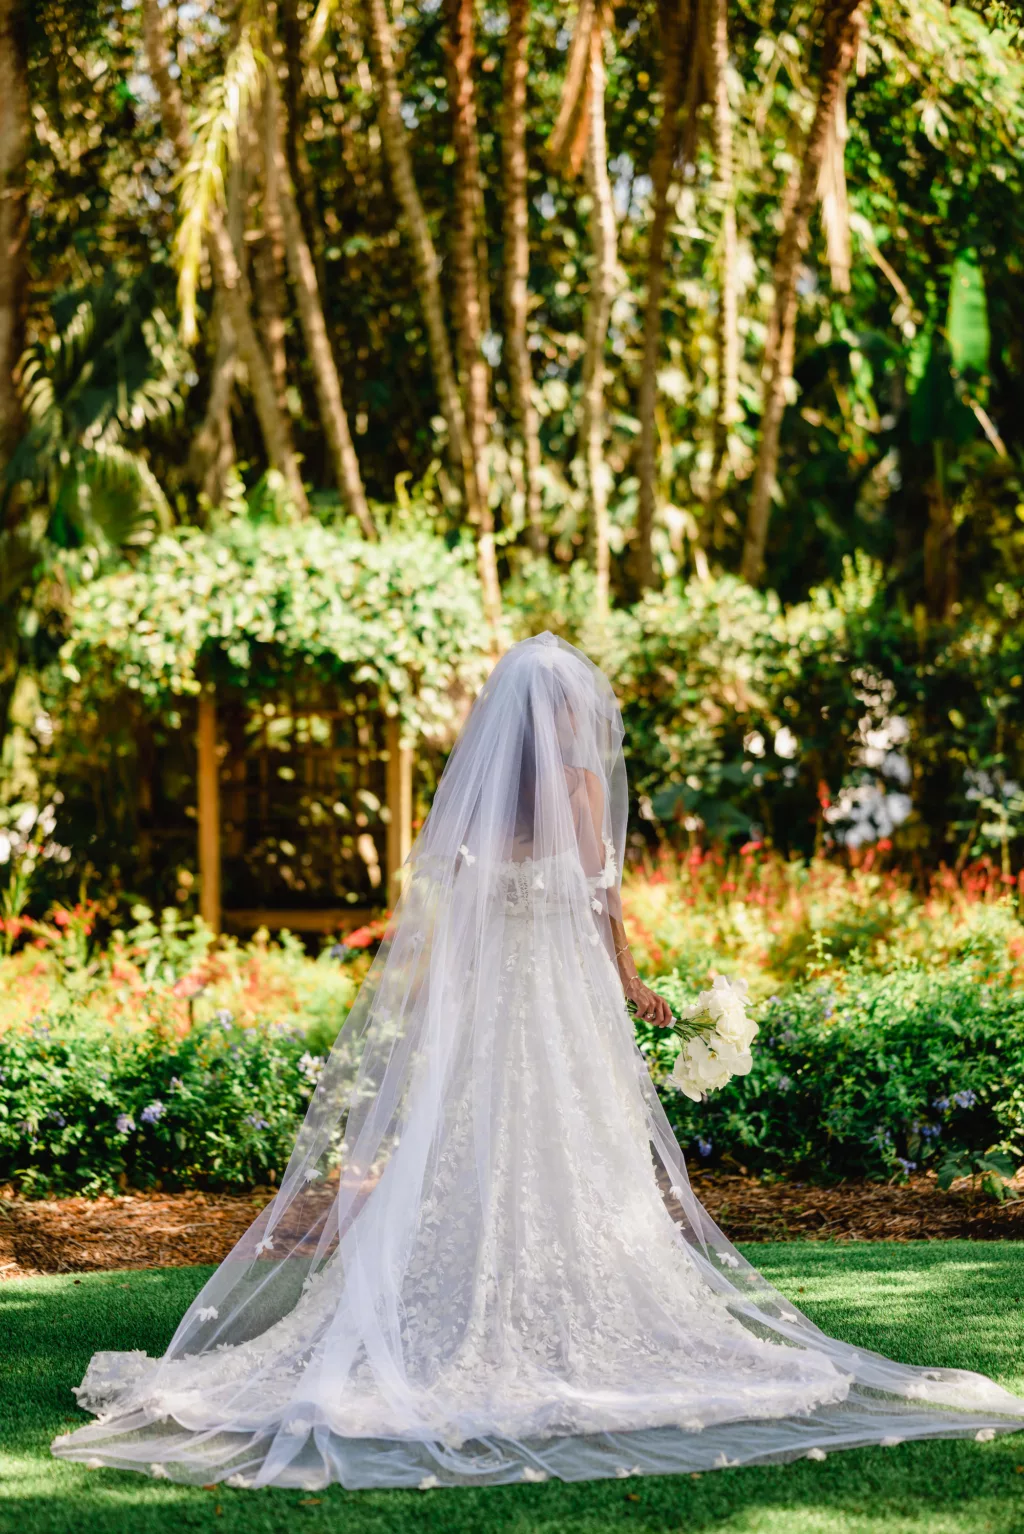 Chapel Length Veil with Flower Appliques | White Removable Off-the-Shoulder Straps, A-Line Floral Applique Wedding Dress Ideas | Tampa Bay Photographer Iyrus Weddings